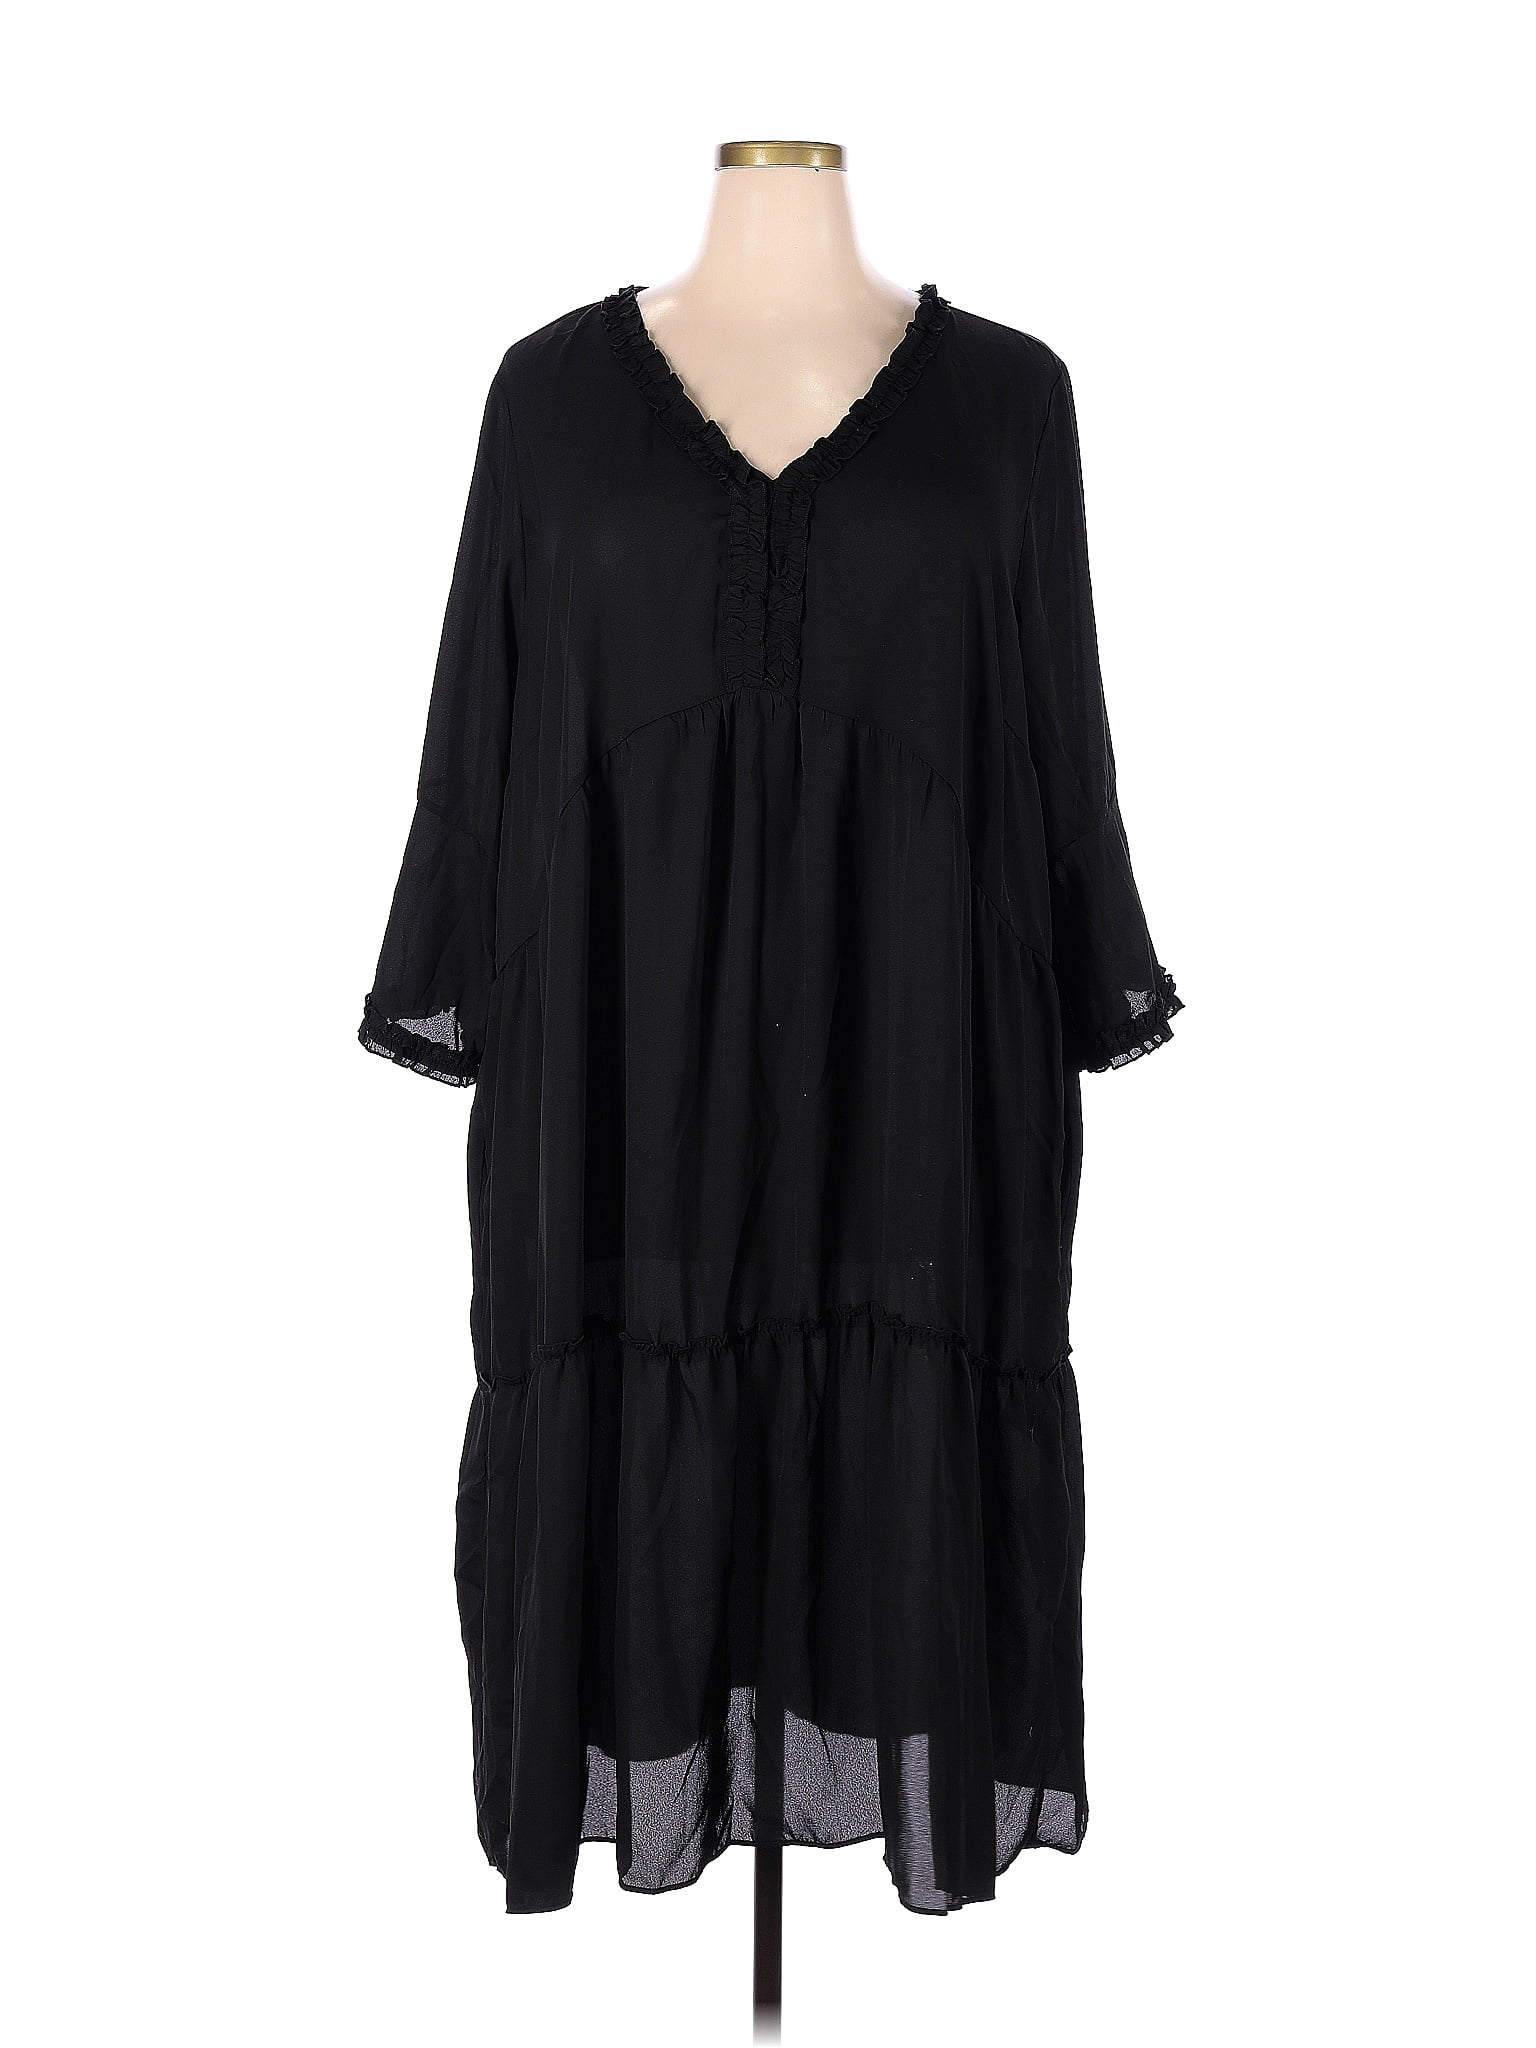 Evans 100% Polyester Solid Black Casual Dress Size 22 - 24 (Plus) - 60% ...